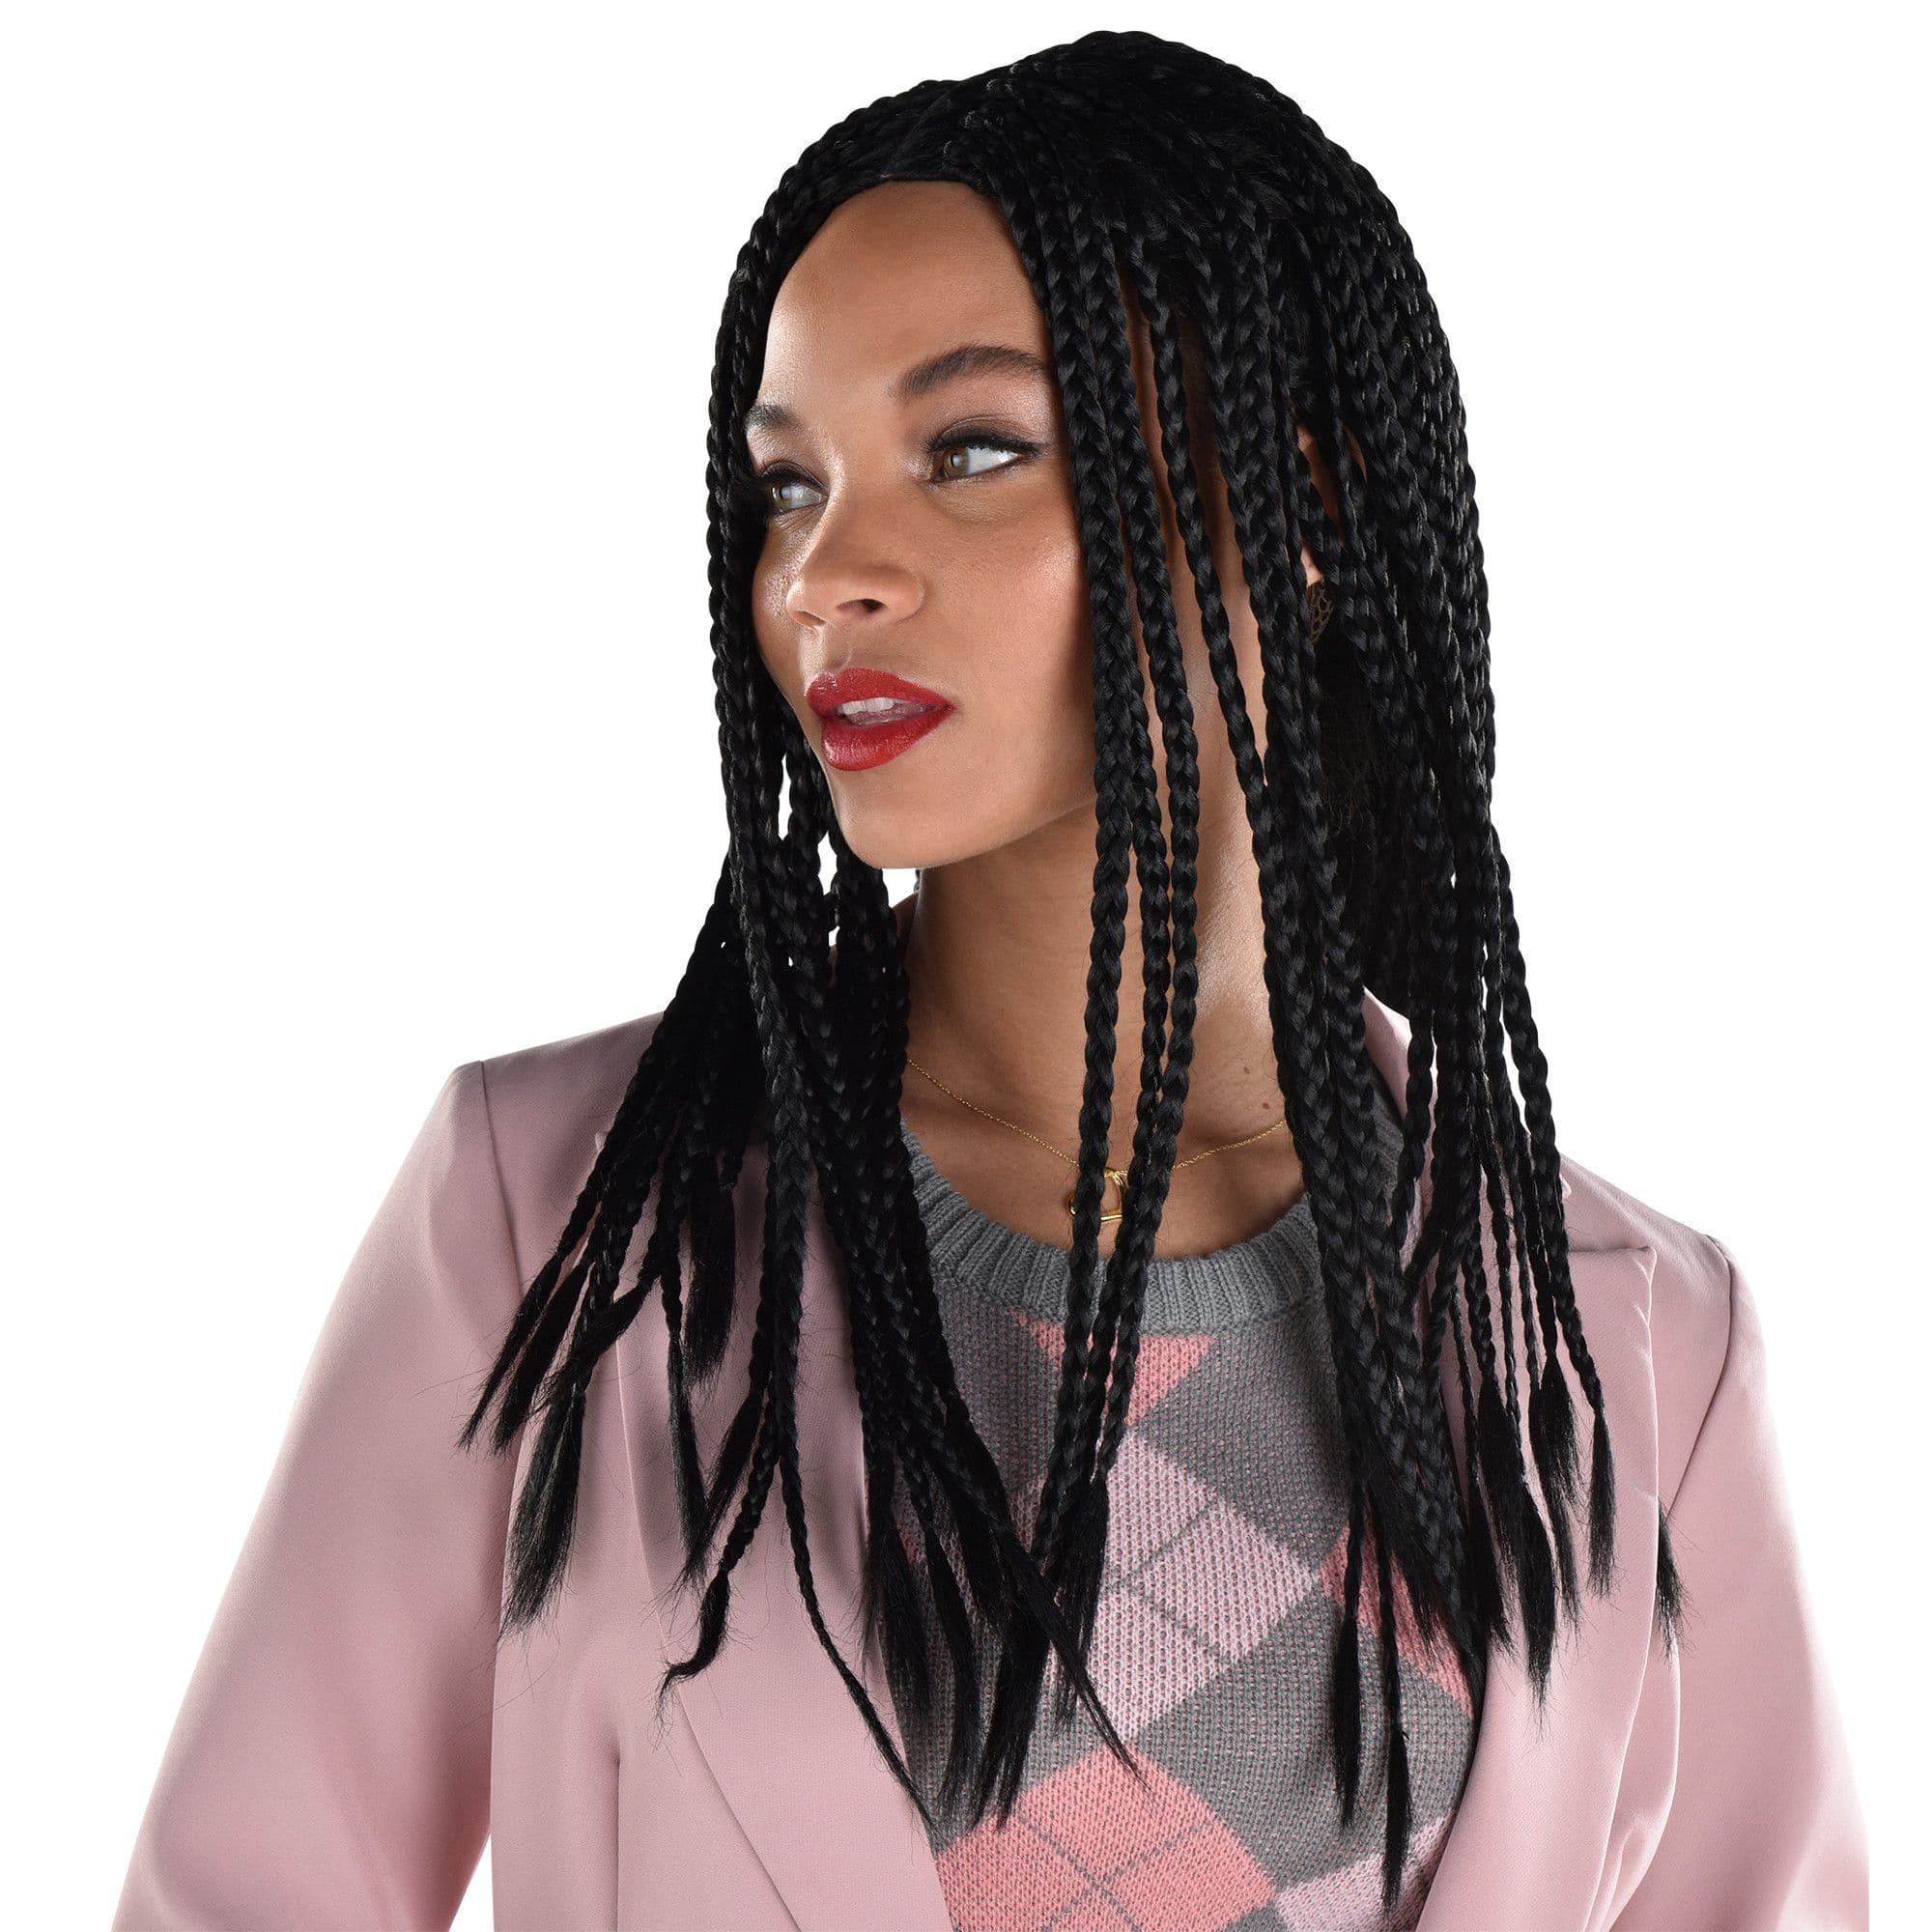 Box Braids Long Hair Wig, Black, One Size, Wearable Costume Accessory for  Halloween